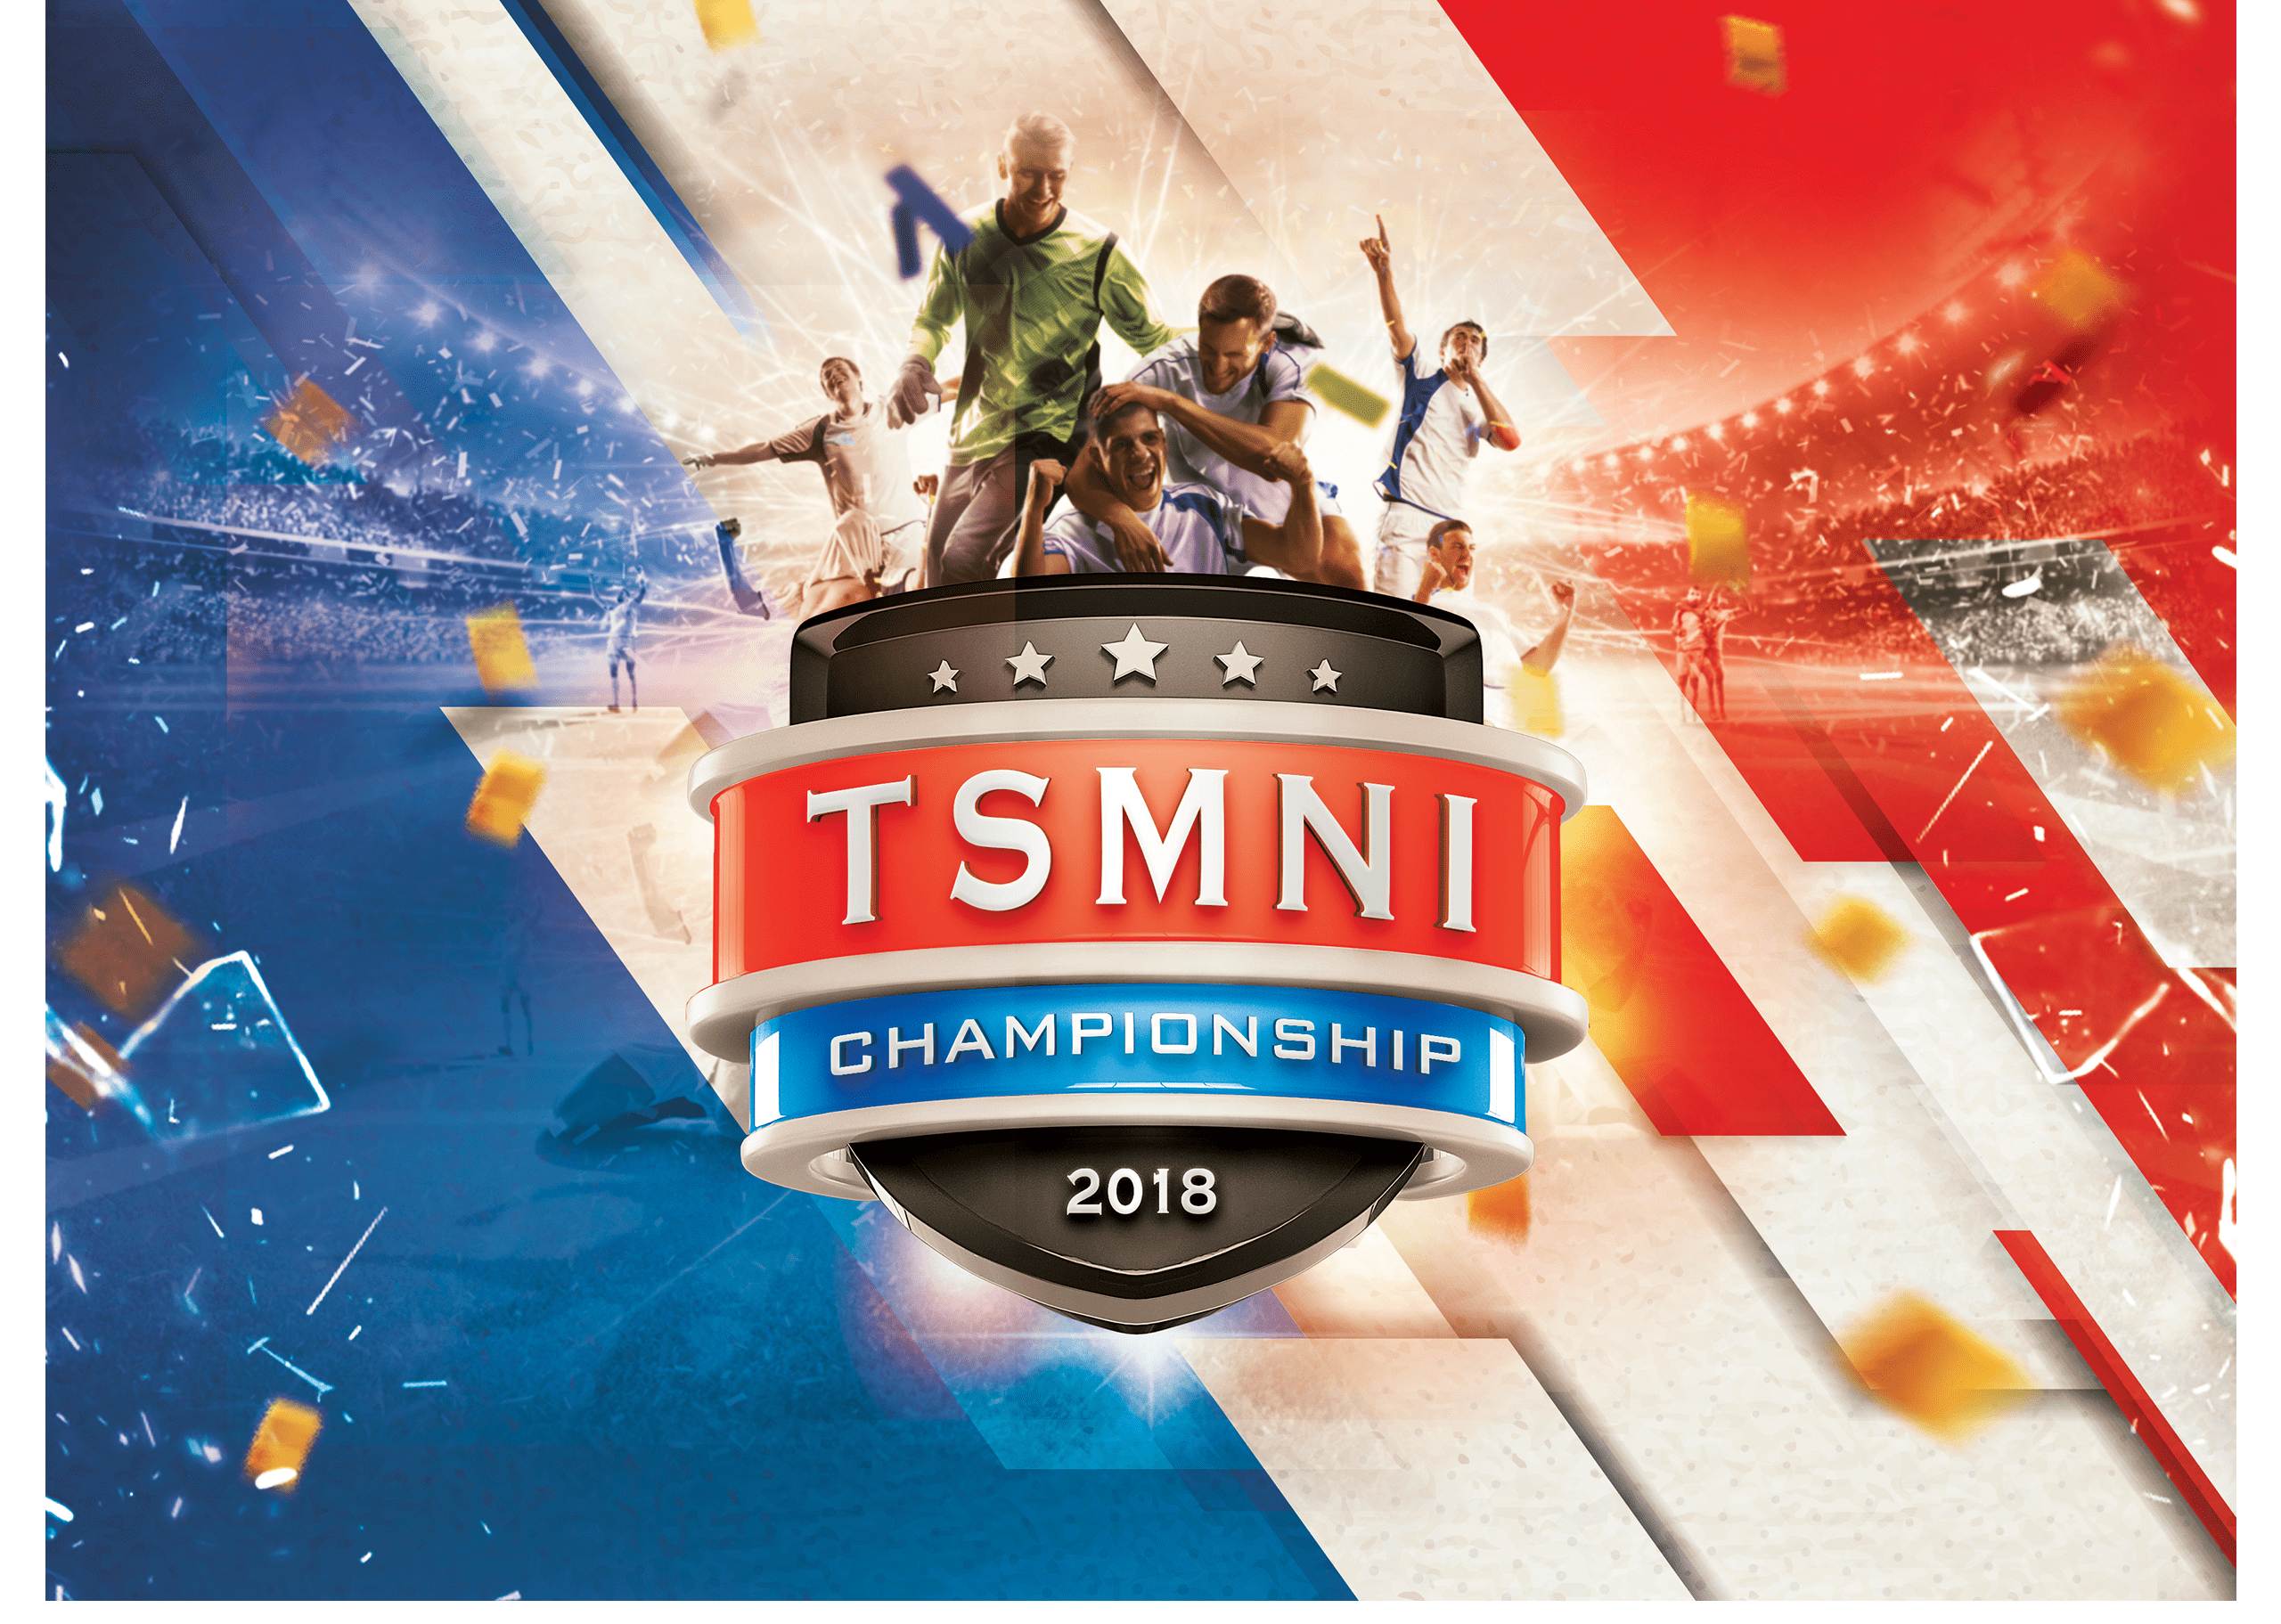 TSMNI Championship 2018 is an uptown sports annual sports event management. Futsal, Badminton, Netball and Volleyball tournament event branding